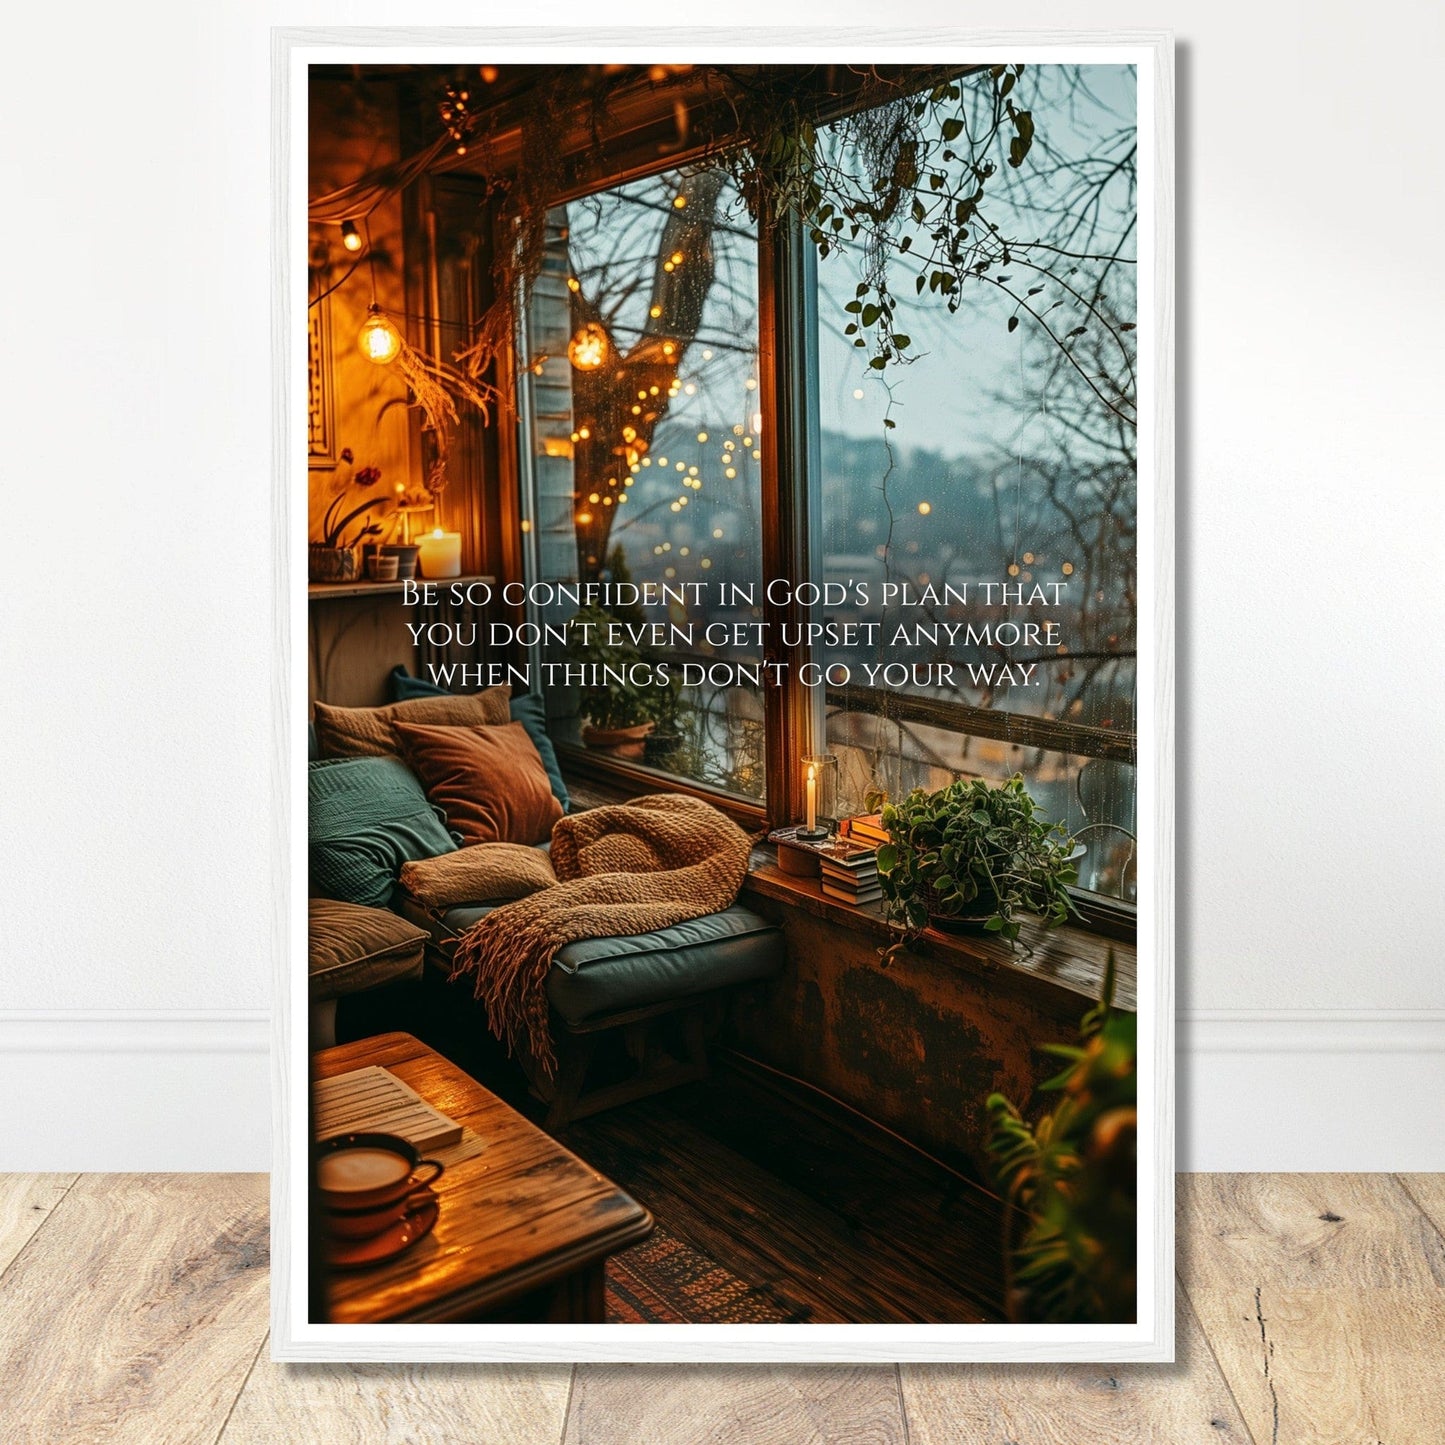 Coffee With My Father Print Material 60x90 cm / 24x36″ / Premium Matte Paper Wooden Framed Poster / White frame Premium Matte Paper Wooden Framed Poster